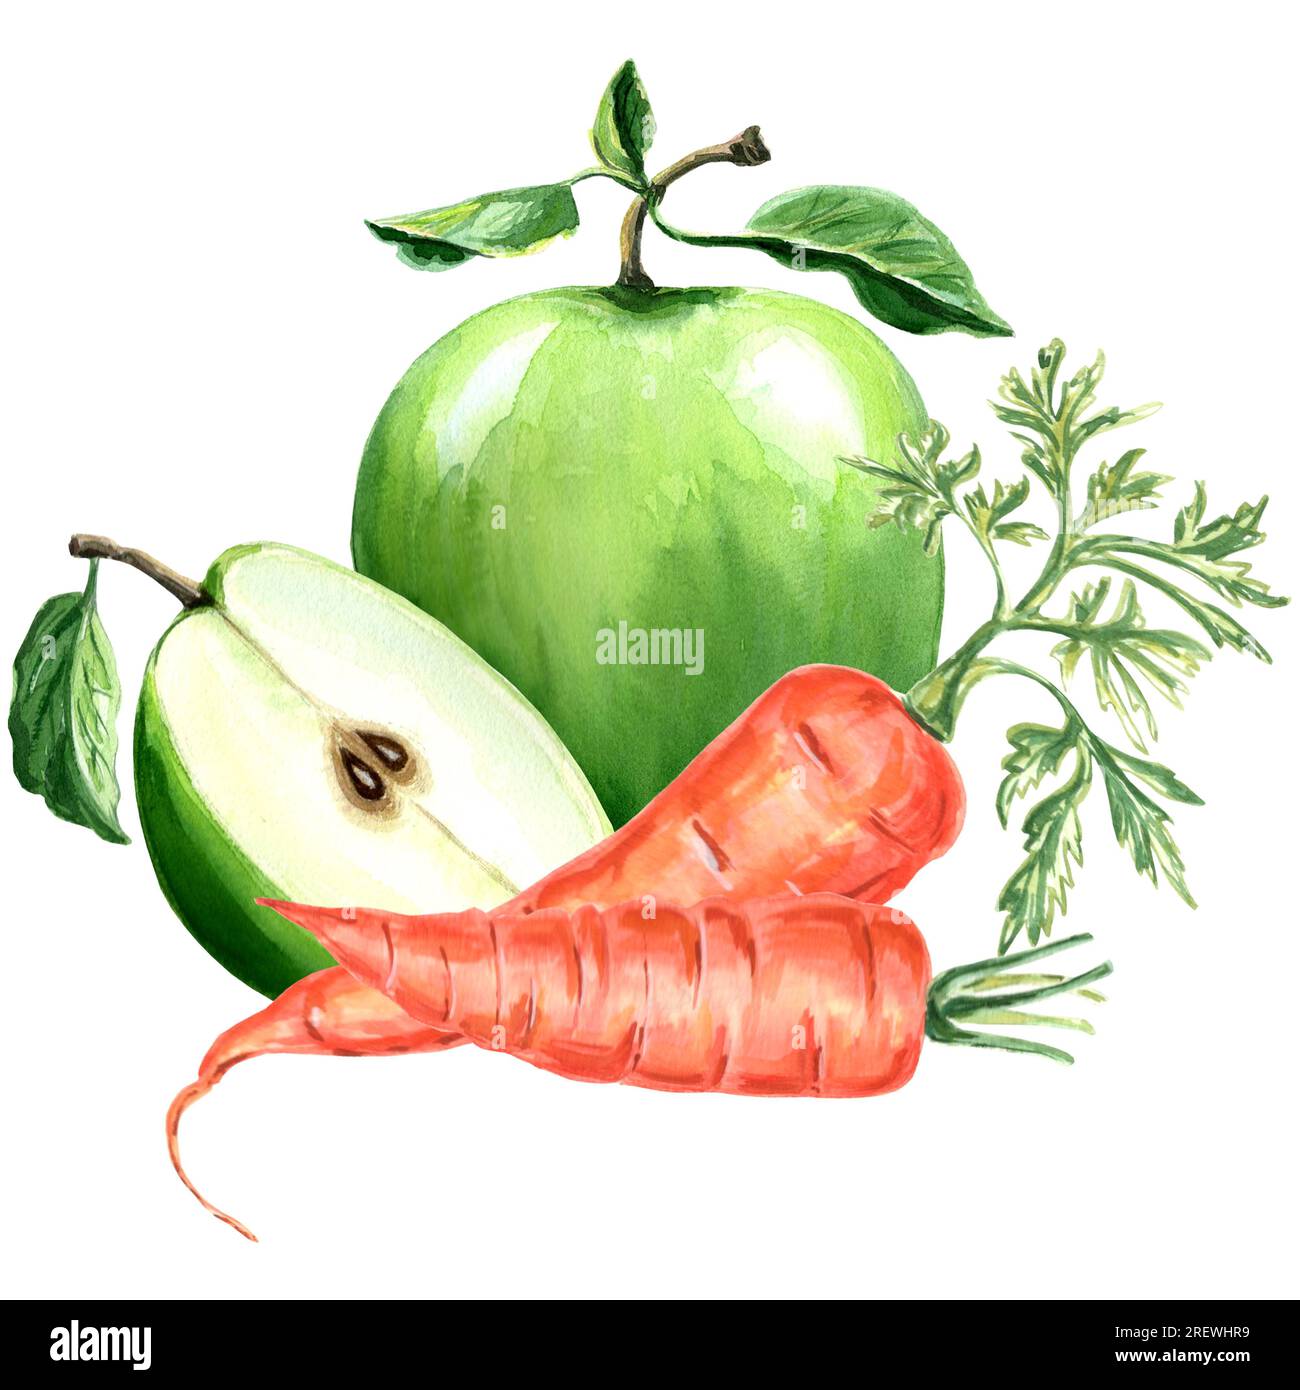 Watercolor illustration of green apple and carrot. Hand drawn watercolor illustration JPEG for design, fabrics, wrapping paper, wallpaper, covers Stock Photo